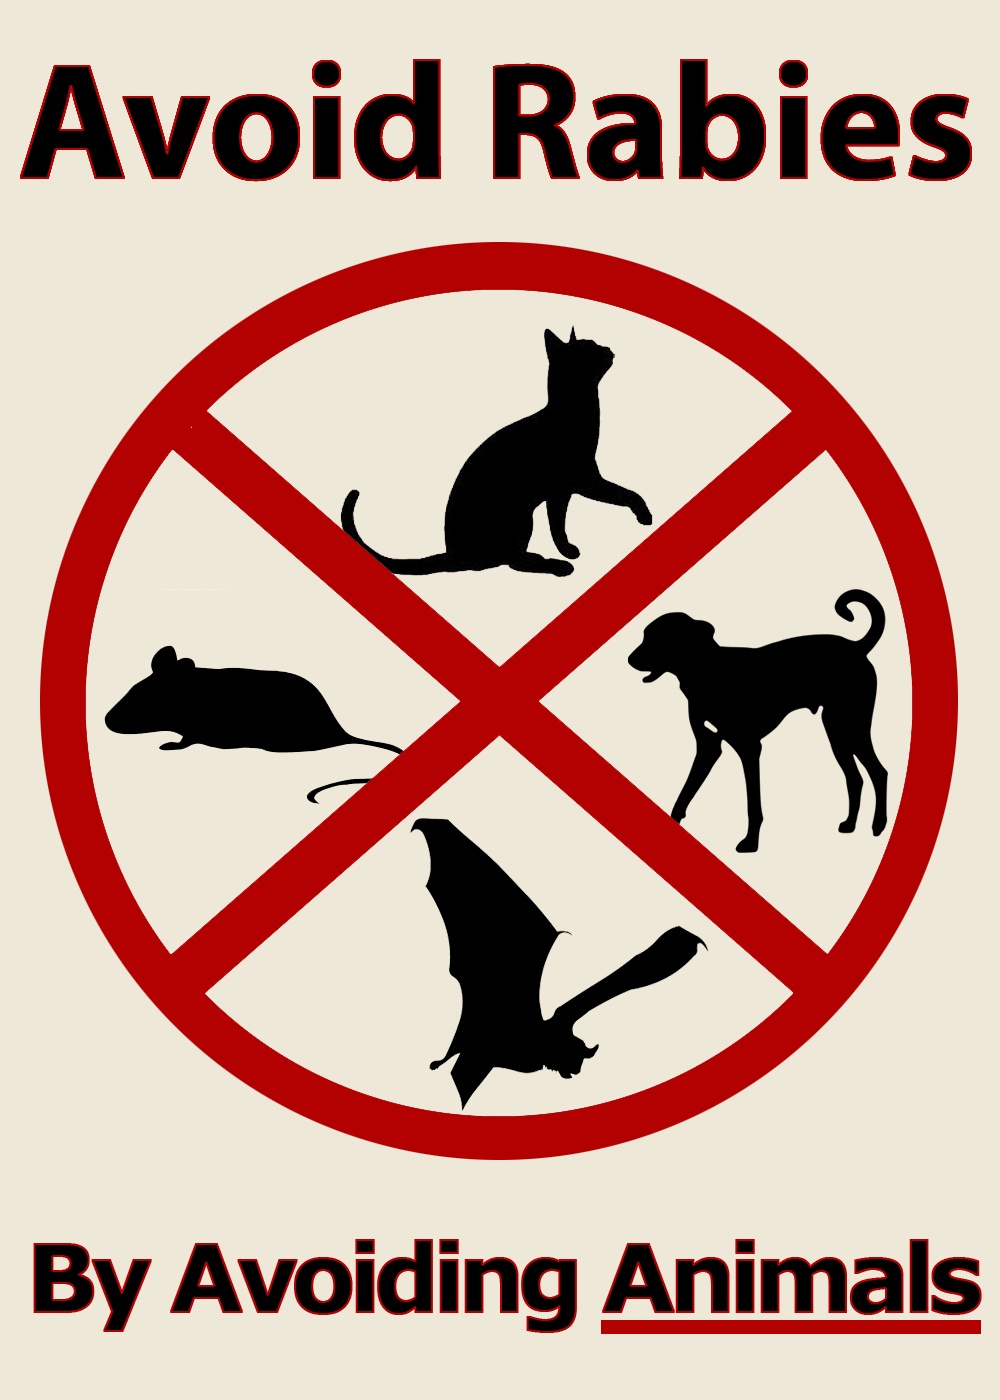 DVIDS - News - Rabies can be a real threat